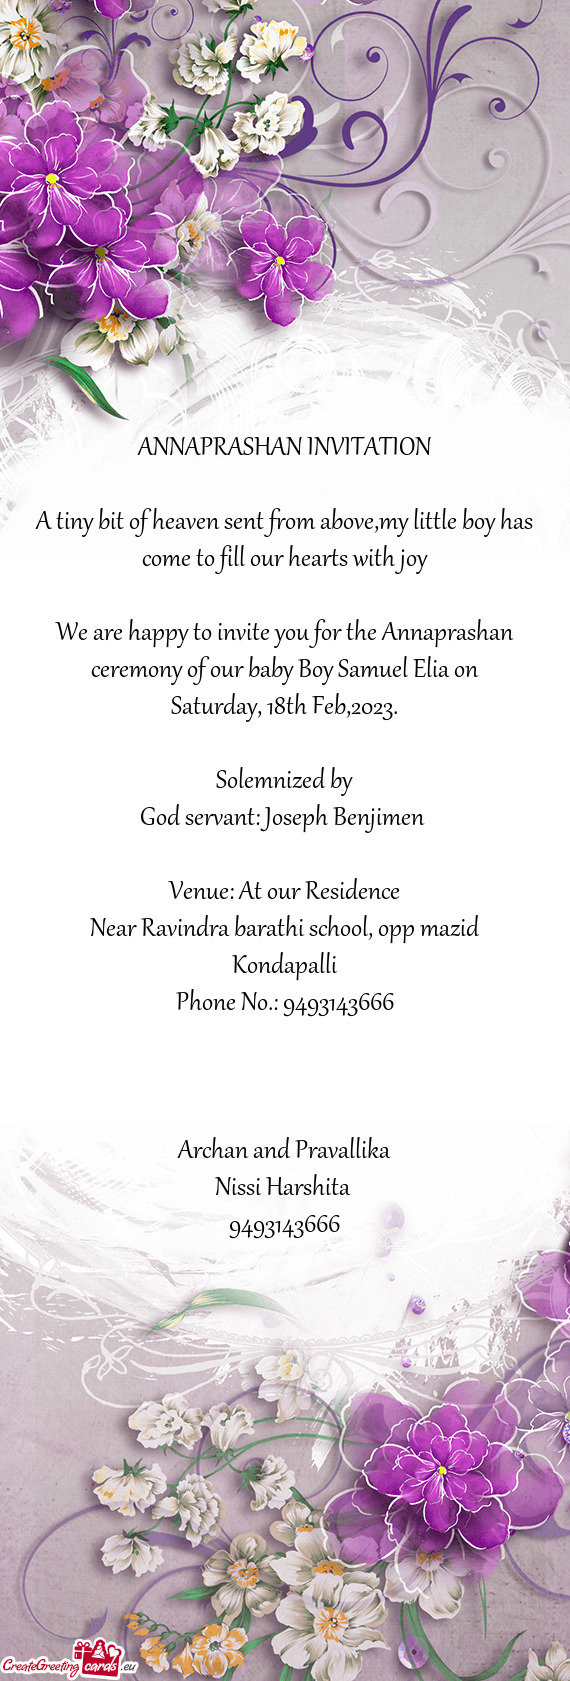 We are happy to invite you for the Annaprashan ceremony of our baby Boy Samuel Elia on